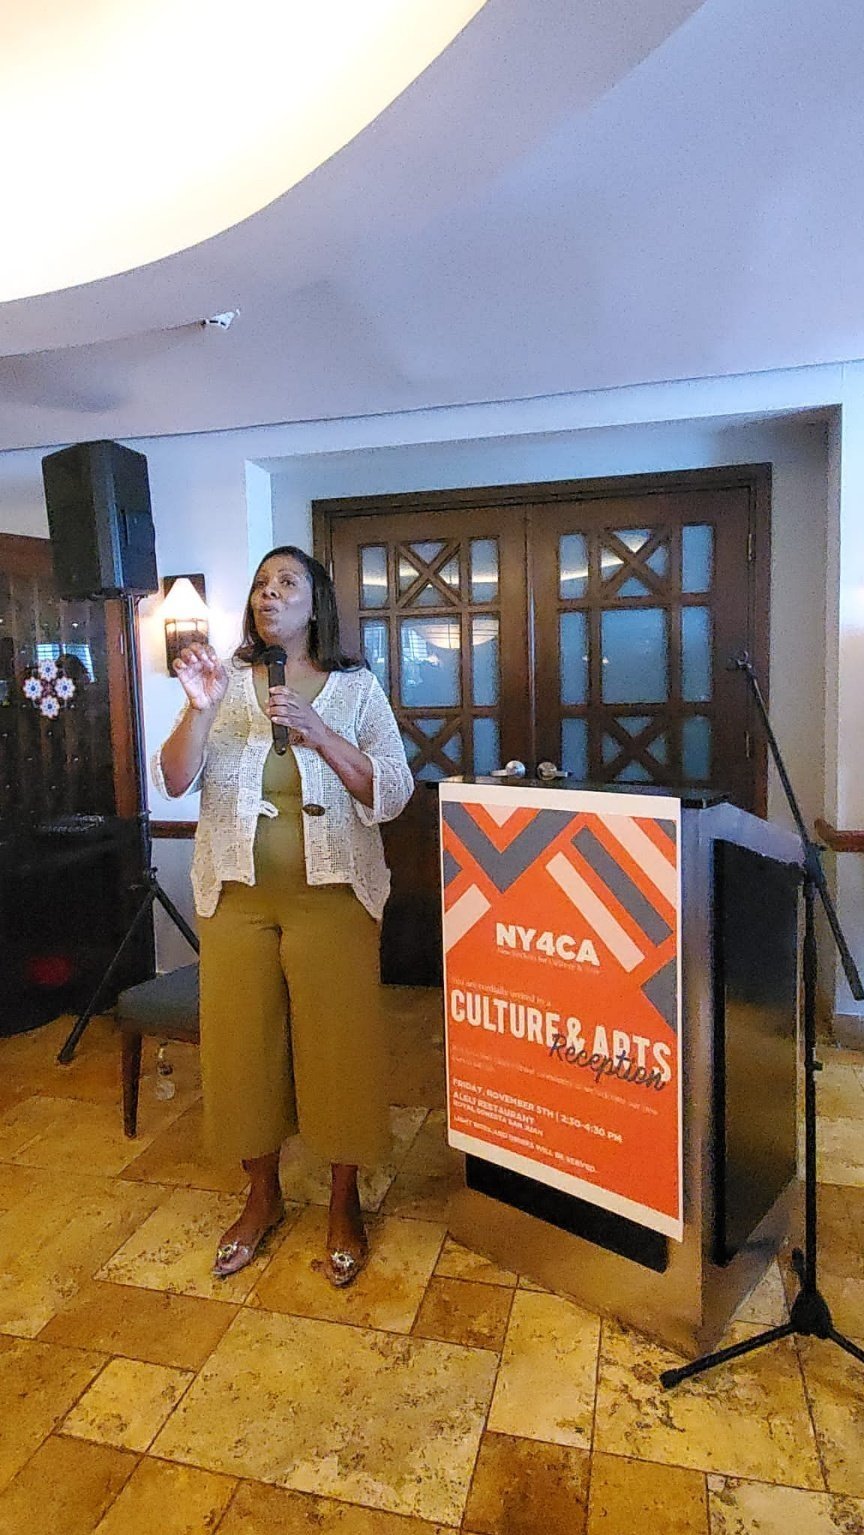  Tish James speaks into a microphone standing in front of a podium that features a banner that reads “NY4CA Culture &amp; Arts reception”  